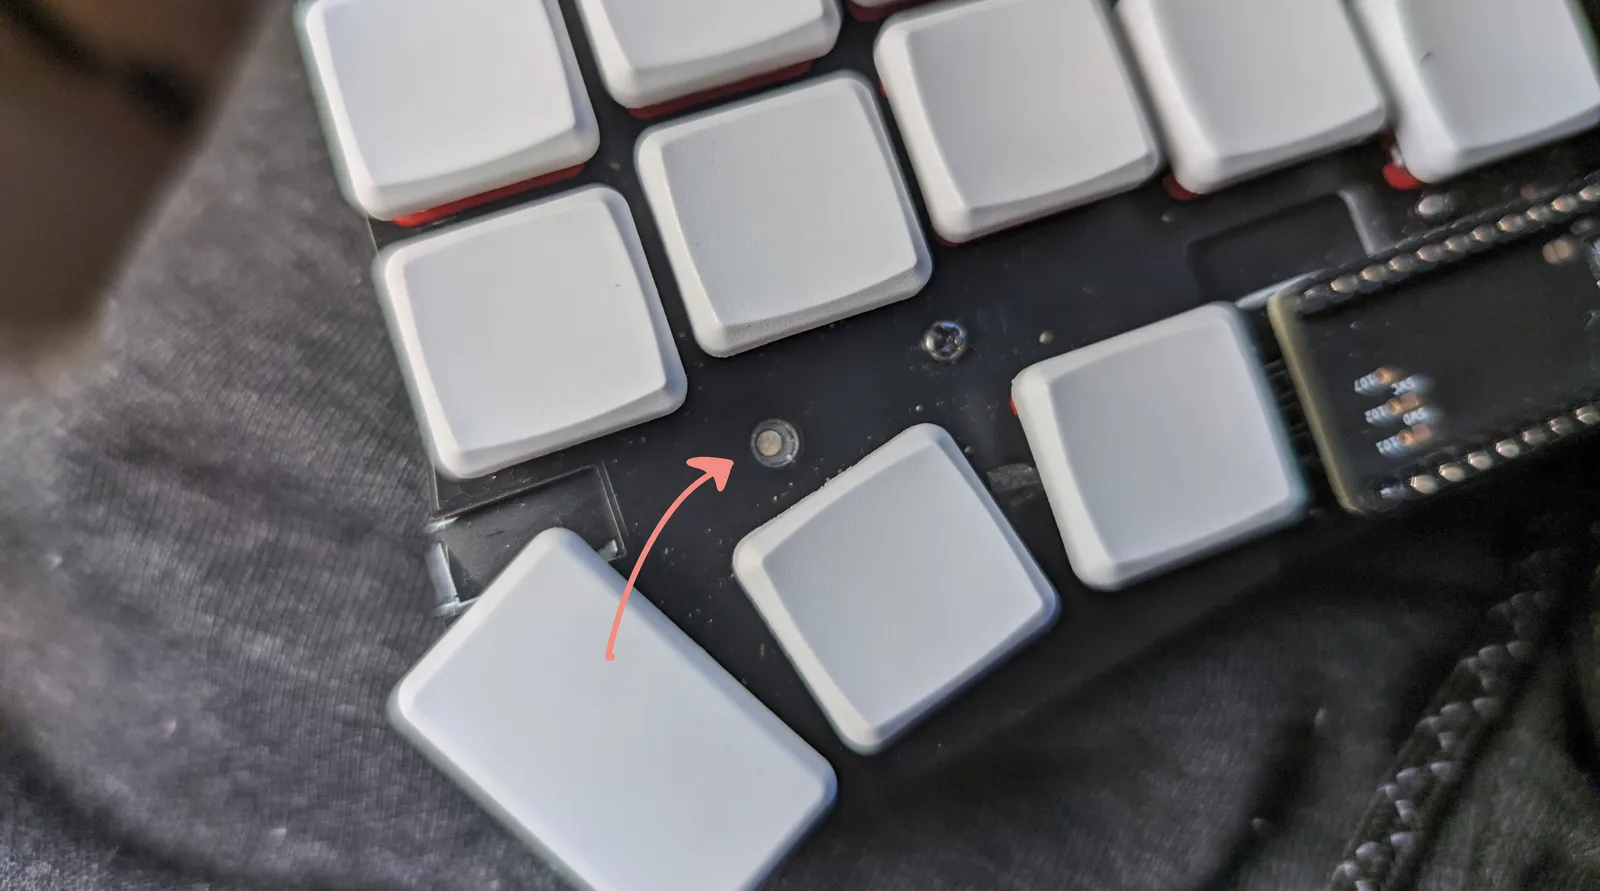 The Microdox keyboard with an arrow pointing where the reset button is